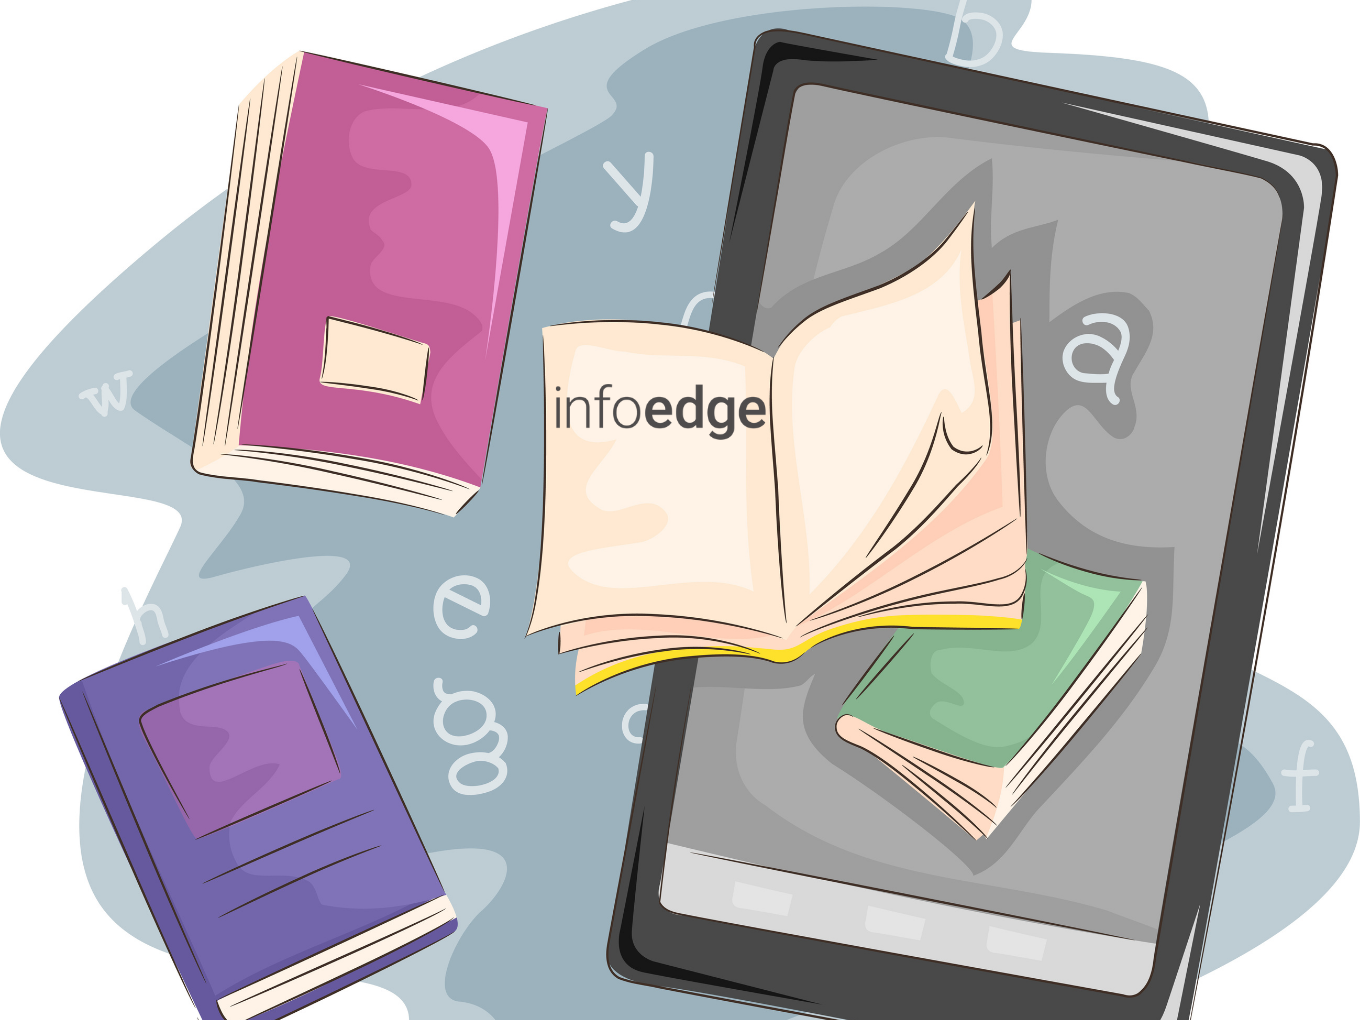 Info Edge Acquires 25% Stake In Edtech Startup Juno Learning For INR 11.25 Cr